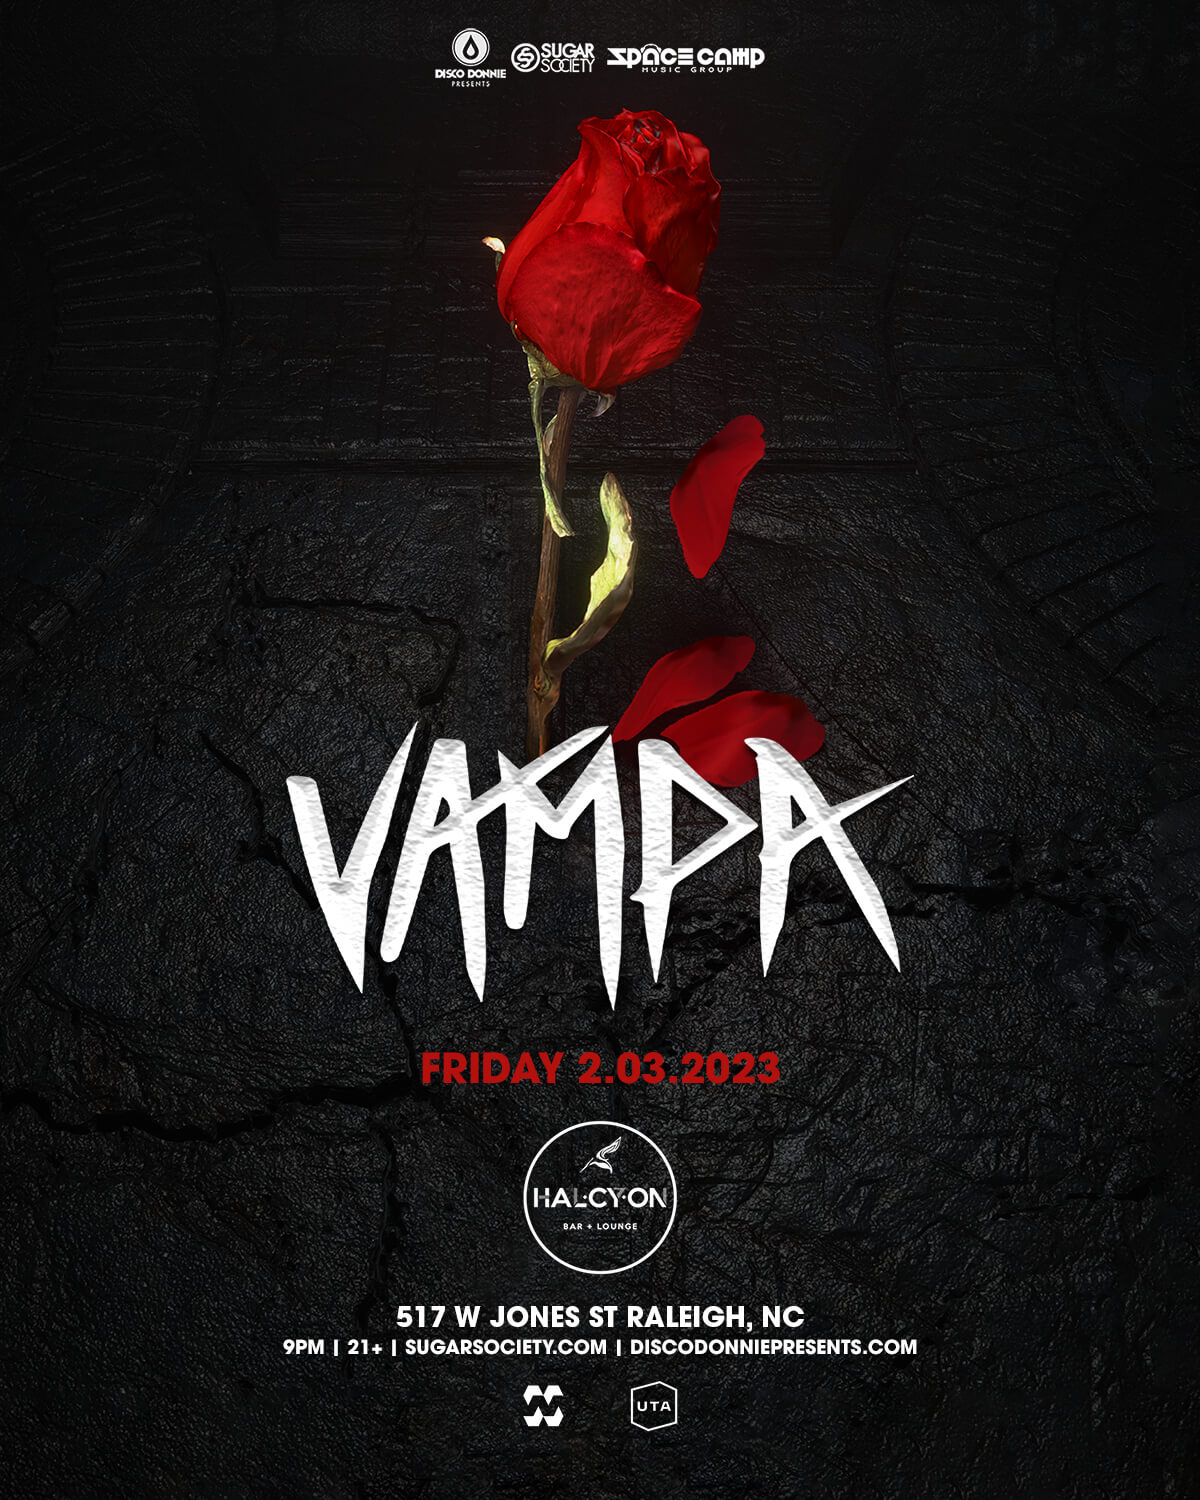 Vampa in Raleigh